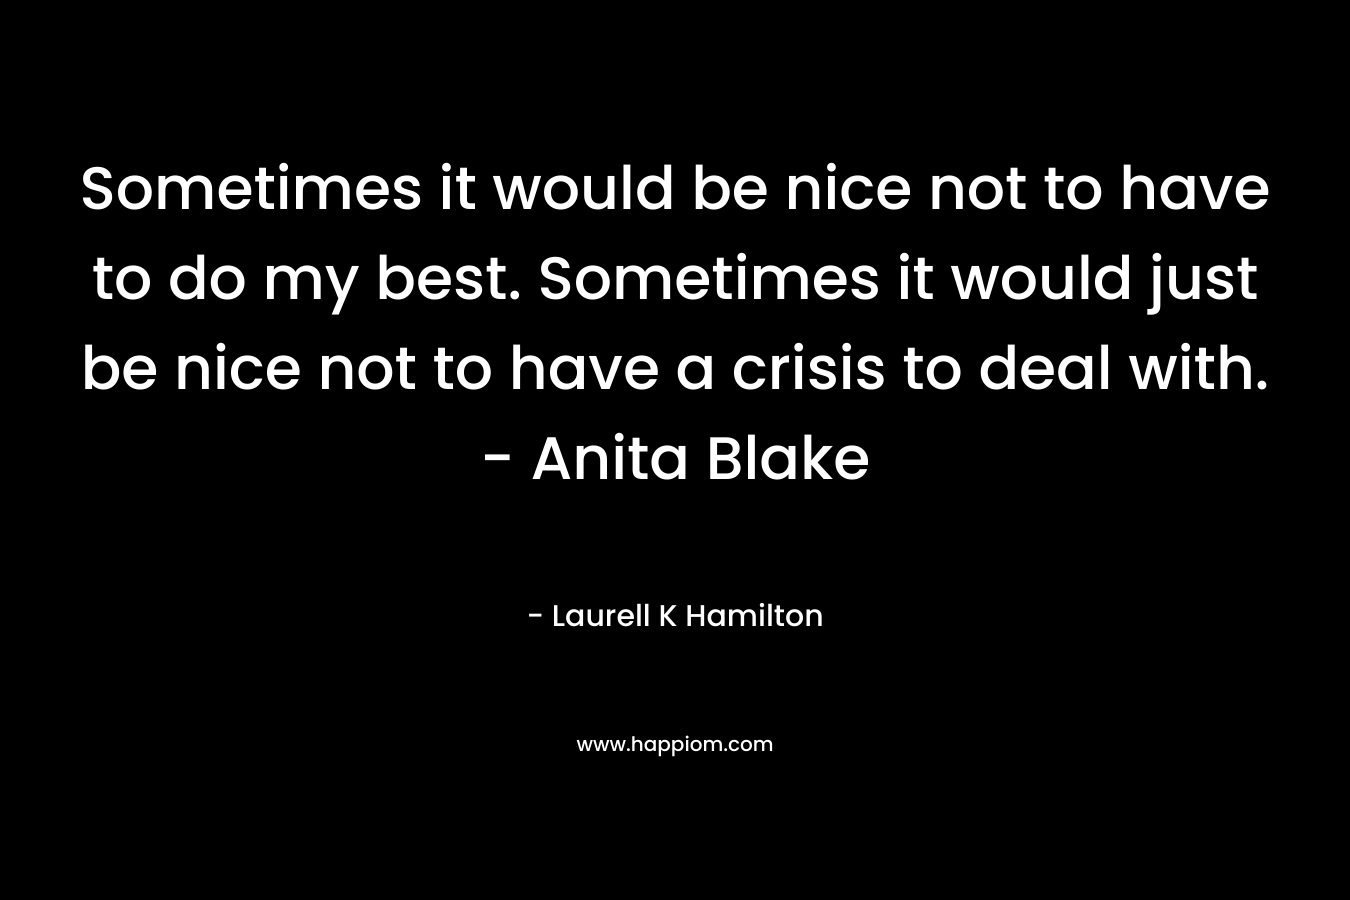 Sometimes it would be nice not to have to do my best. Sometimes it would just be nice not to have a crisis to deal with. - Anita Blake